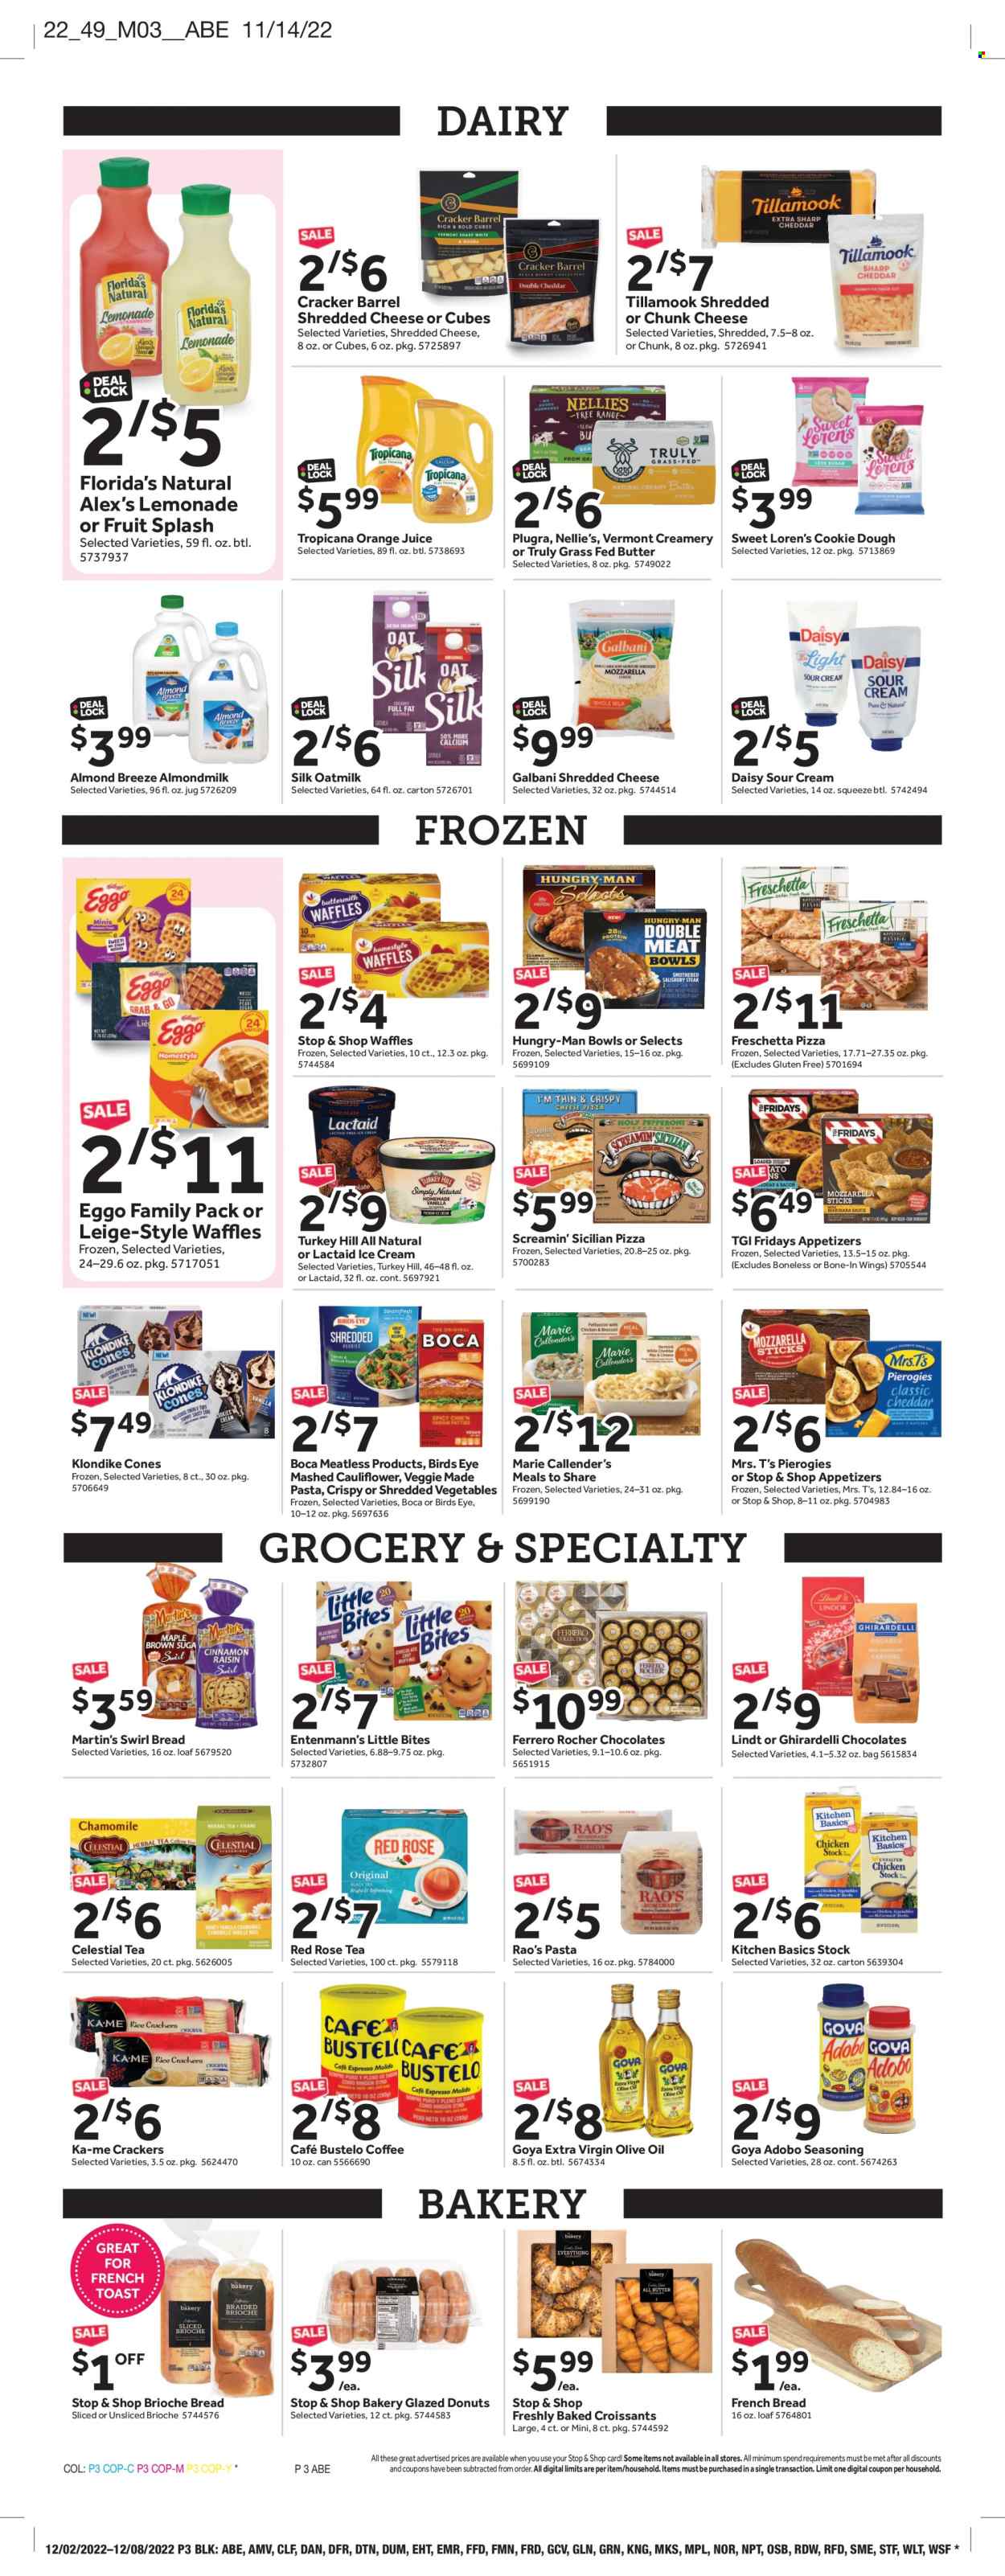 thumbnail - Stop & Shop Flyer - 12/02/2022 - 12/08/2022 - Sales products - bread, croissant, brioche, french bread, donut, waffles, Entenmann's, steak, pizza, pasta, Bird's Eye, Marie Callender's, mashed cauliflower, Lactaid, shredded cheese, cheddar, Galbani, chunk cheese, almond milk, Silk, Almond Breeze, oat milk, butter, sour cream, ice cream, Screamin' Sicilian, cookie dough, Lindt, Lindor, Ferrero Rocher, crackers, Ghirardelli, Little Bites, Florida's Natural, rice crackers, Goya, spice, adobo sauce, extra virgin olive oil, olive oil, oil, lemonade, orange juice, juice, tea, coffee, wine, rosé wine, TRULY, rose, calcium. Page 3.